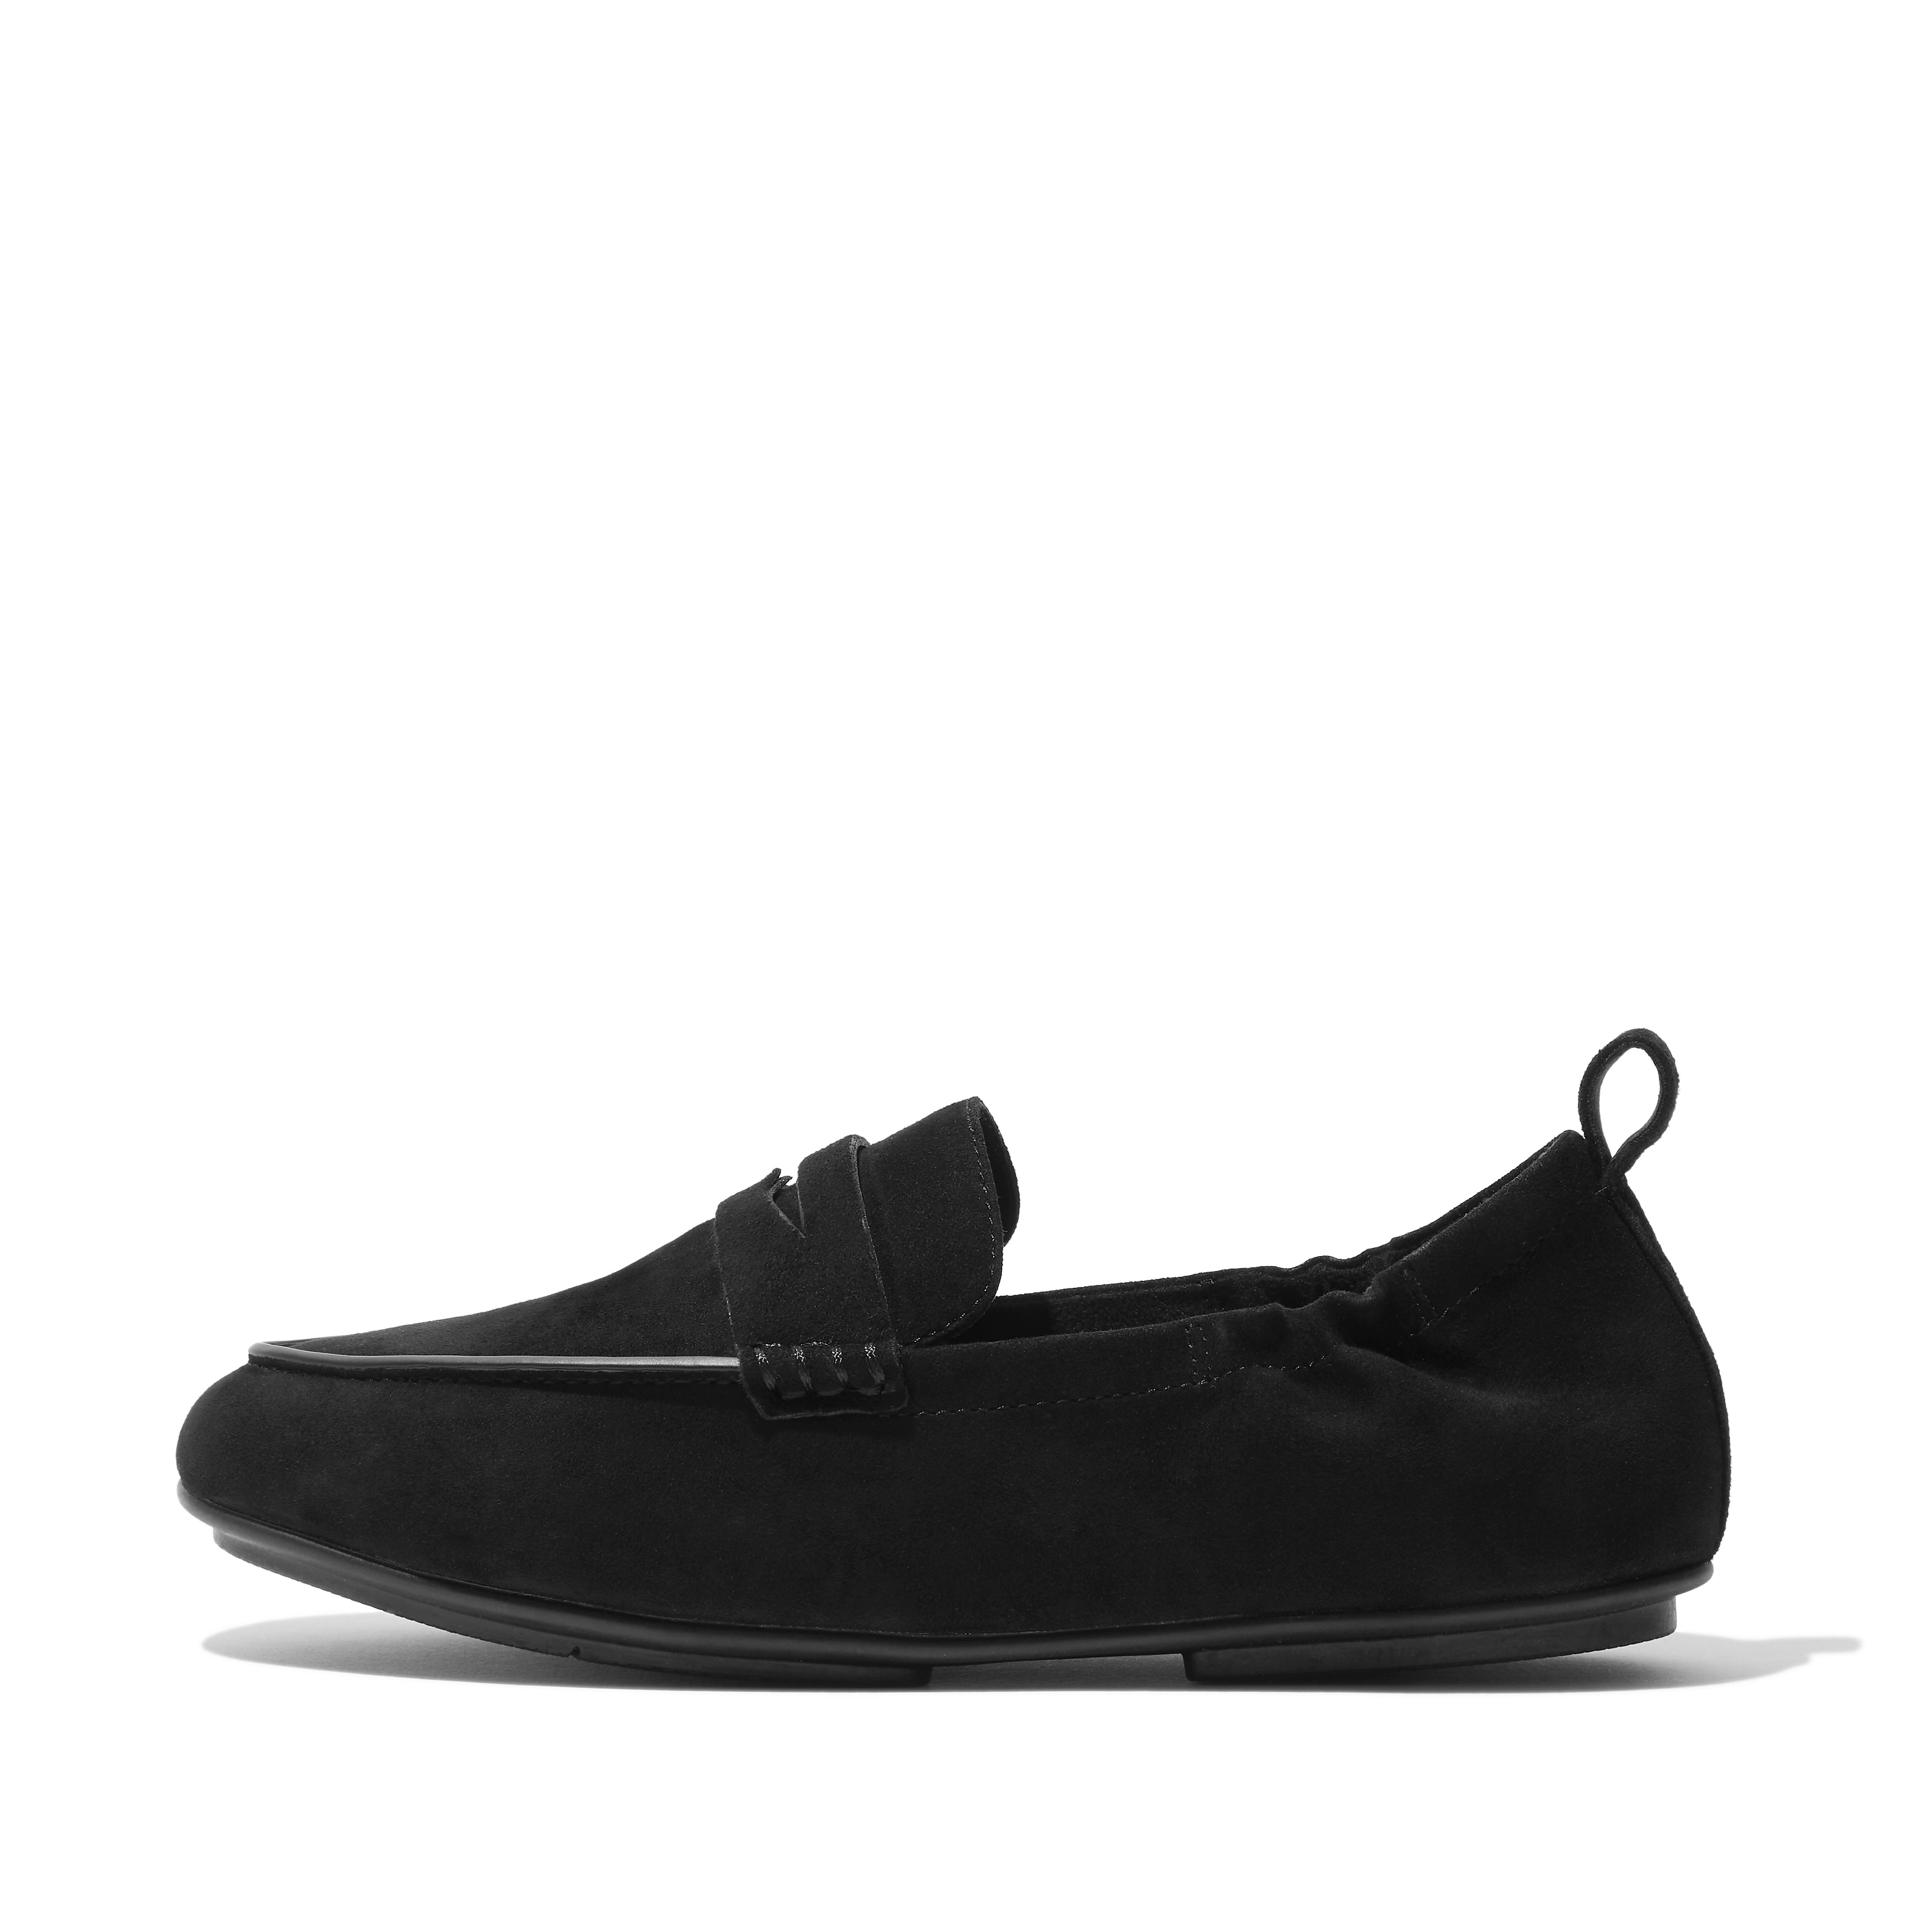 Fitflop Suede Penny Loafers,All Black